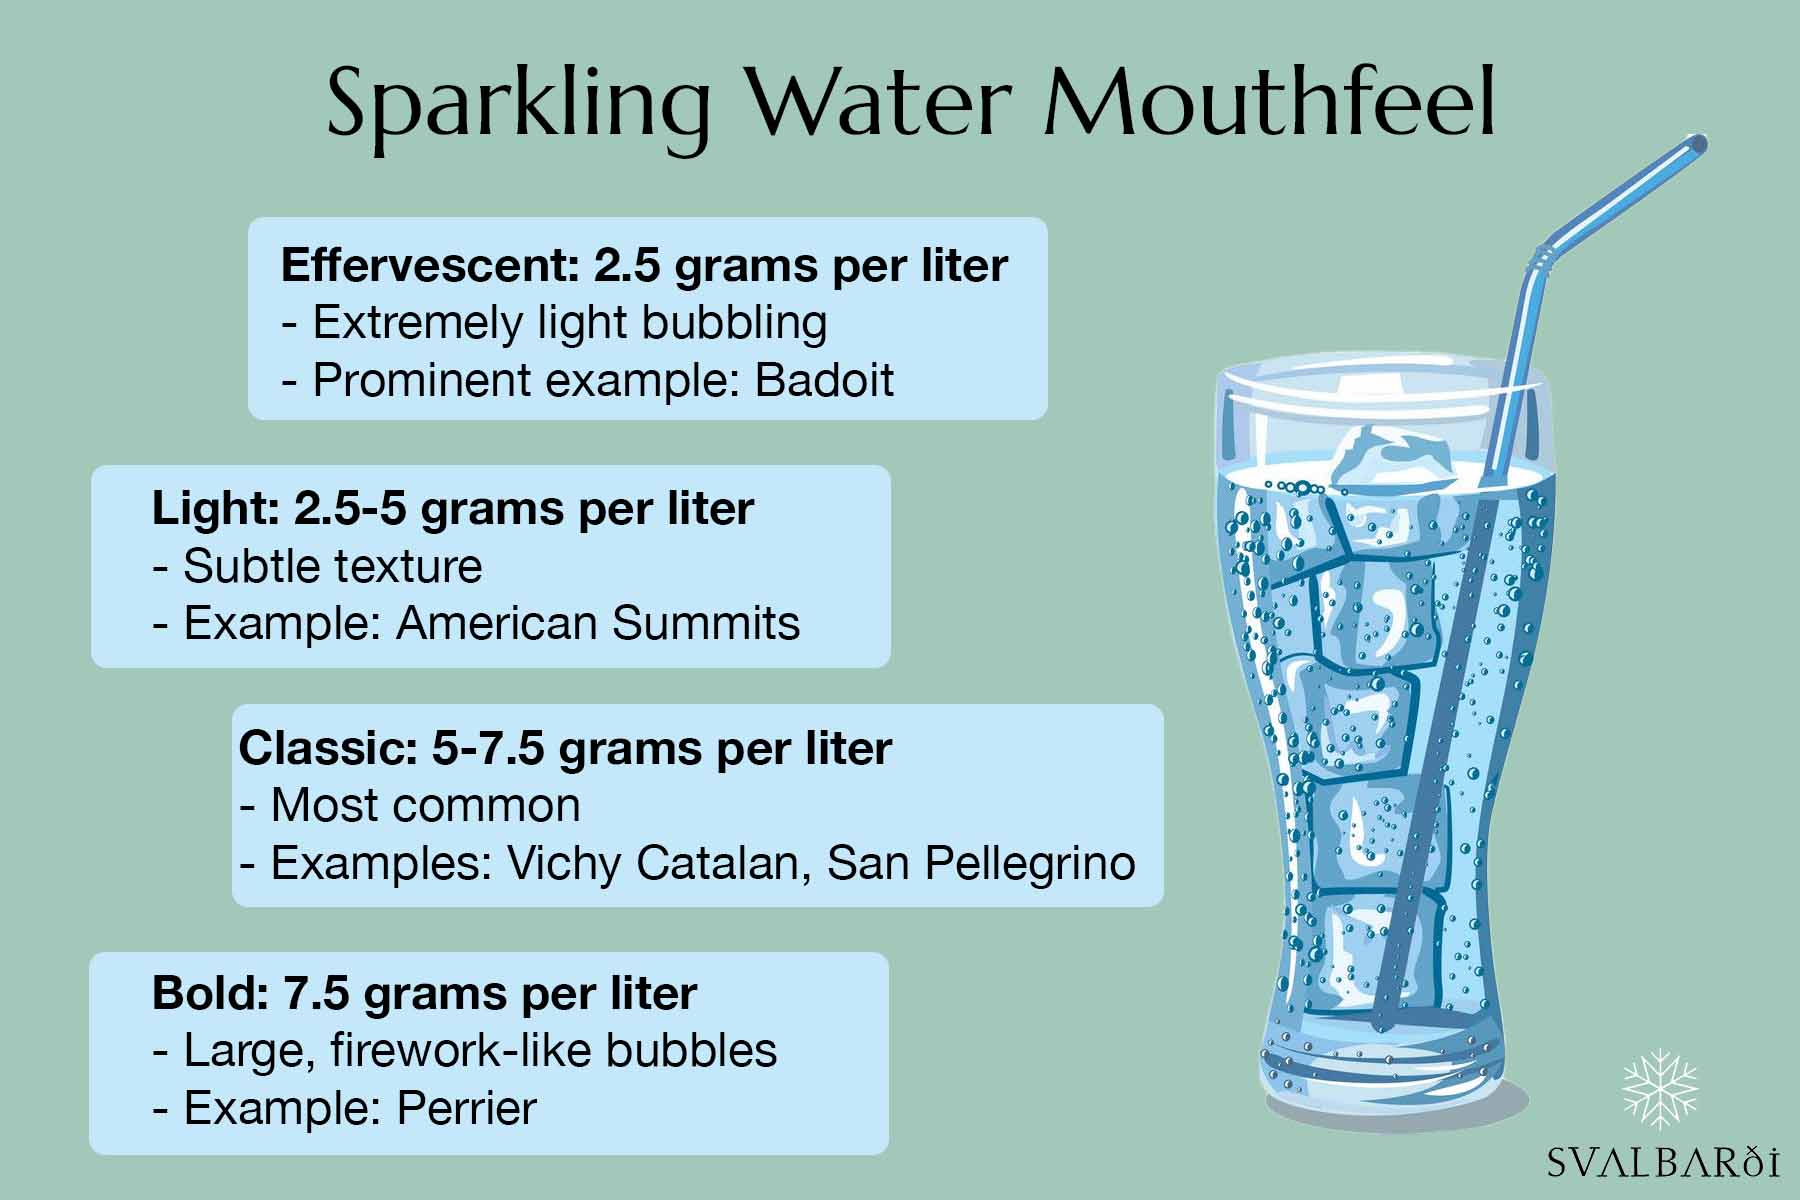 Mouthfeel of Sparkling Water